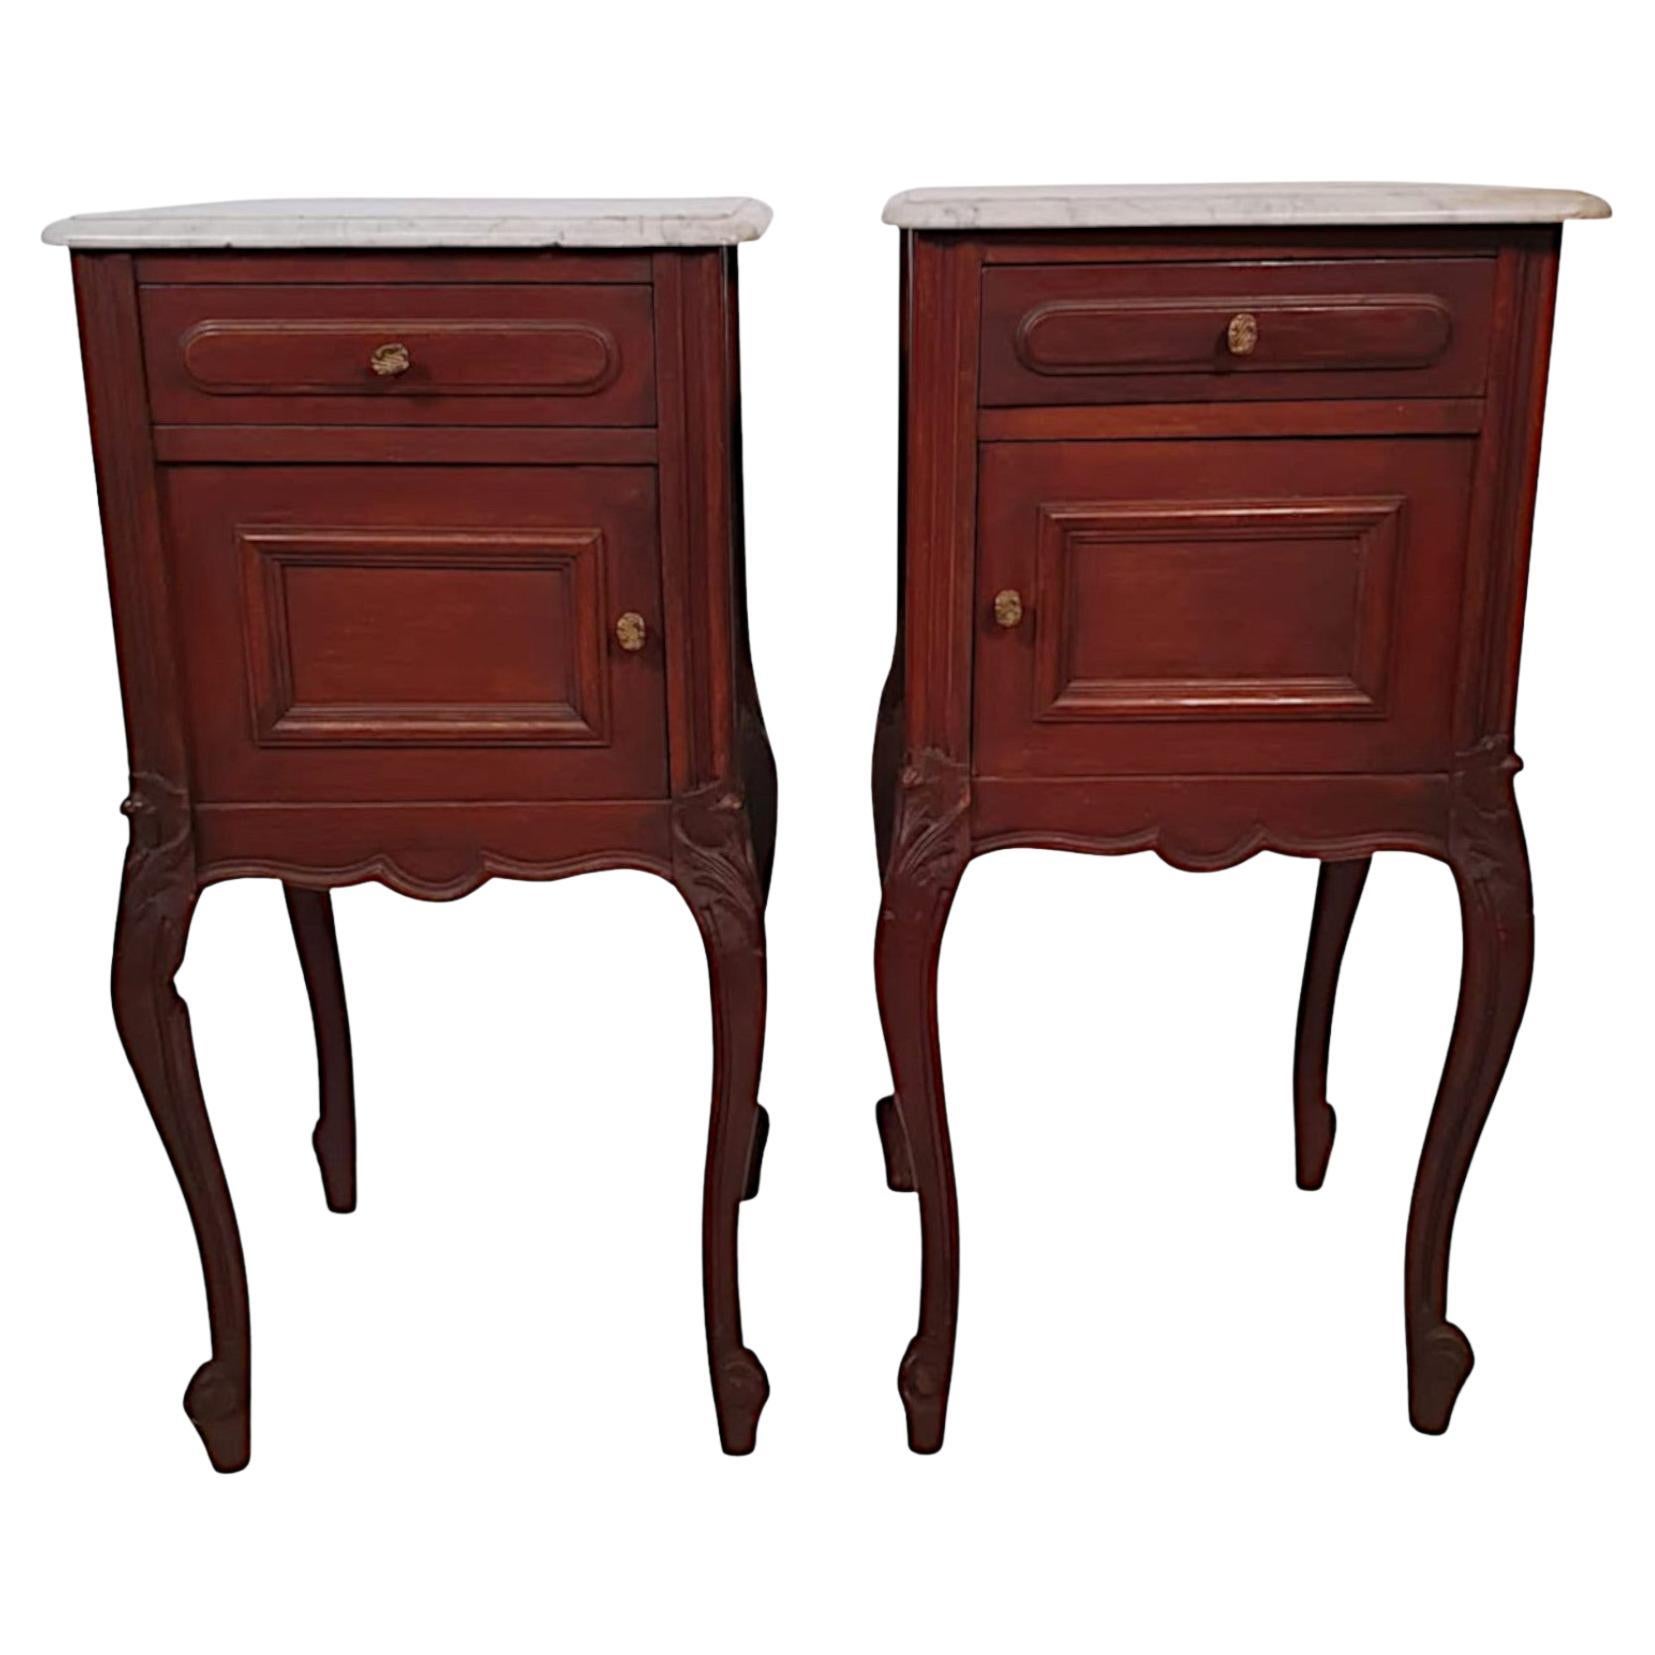 A Stunning Pair of 19th Century French Marble Top Bedside Lockers